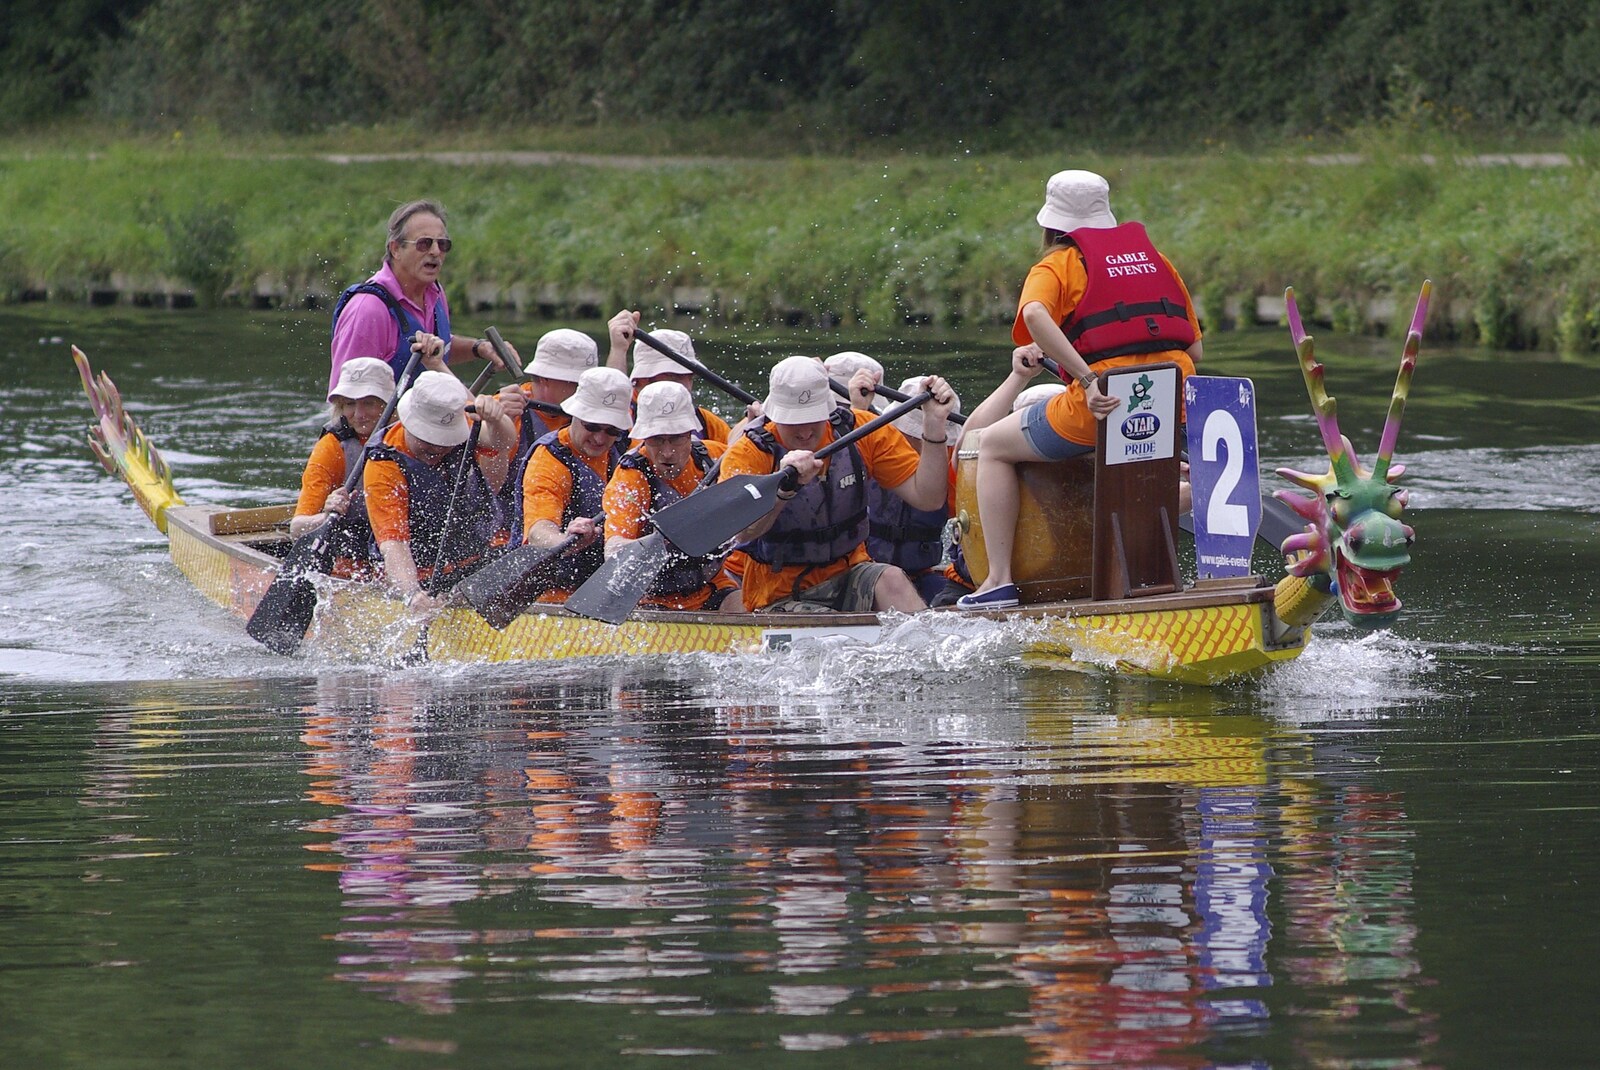 A mass of paddling and spray from Qualcomm's Dragon-Boat Racing, Fen Ditton, Cambridge - 8th September 2007